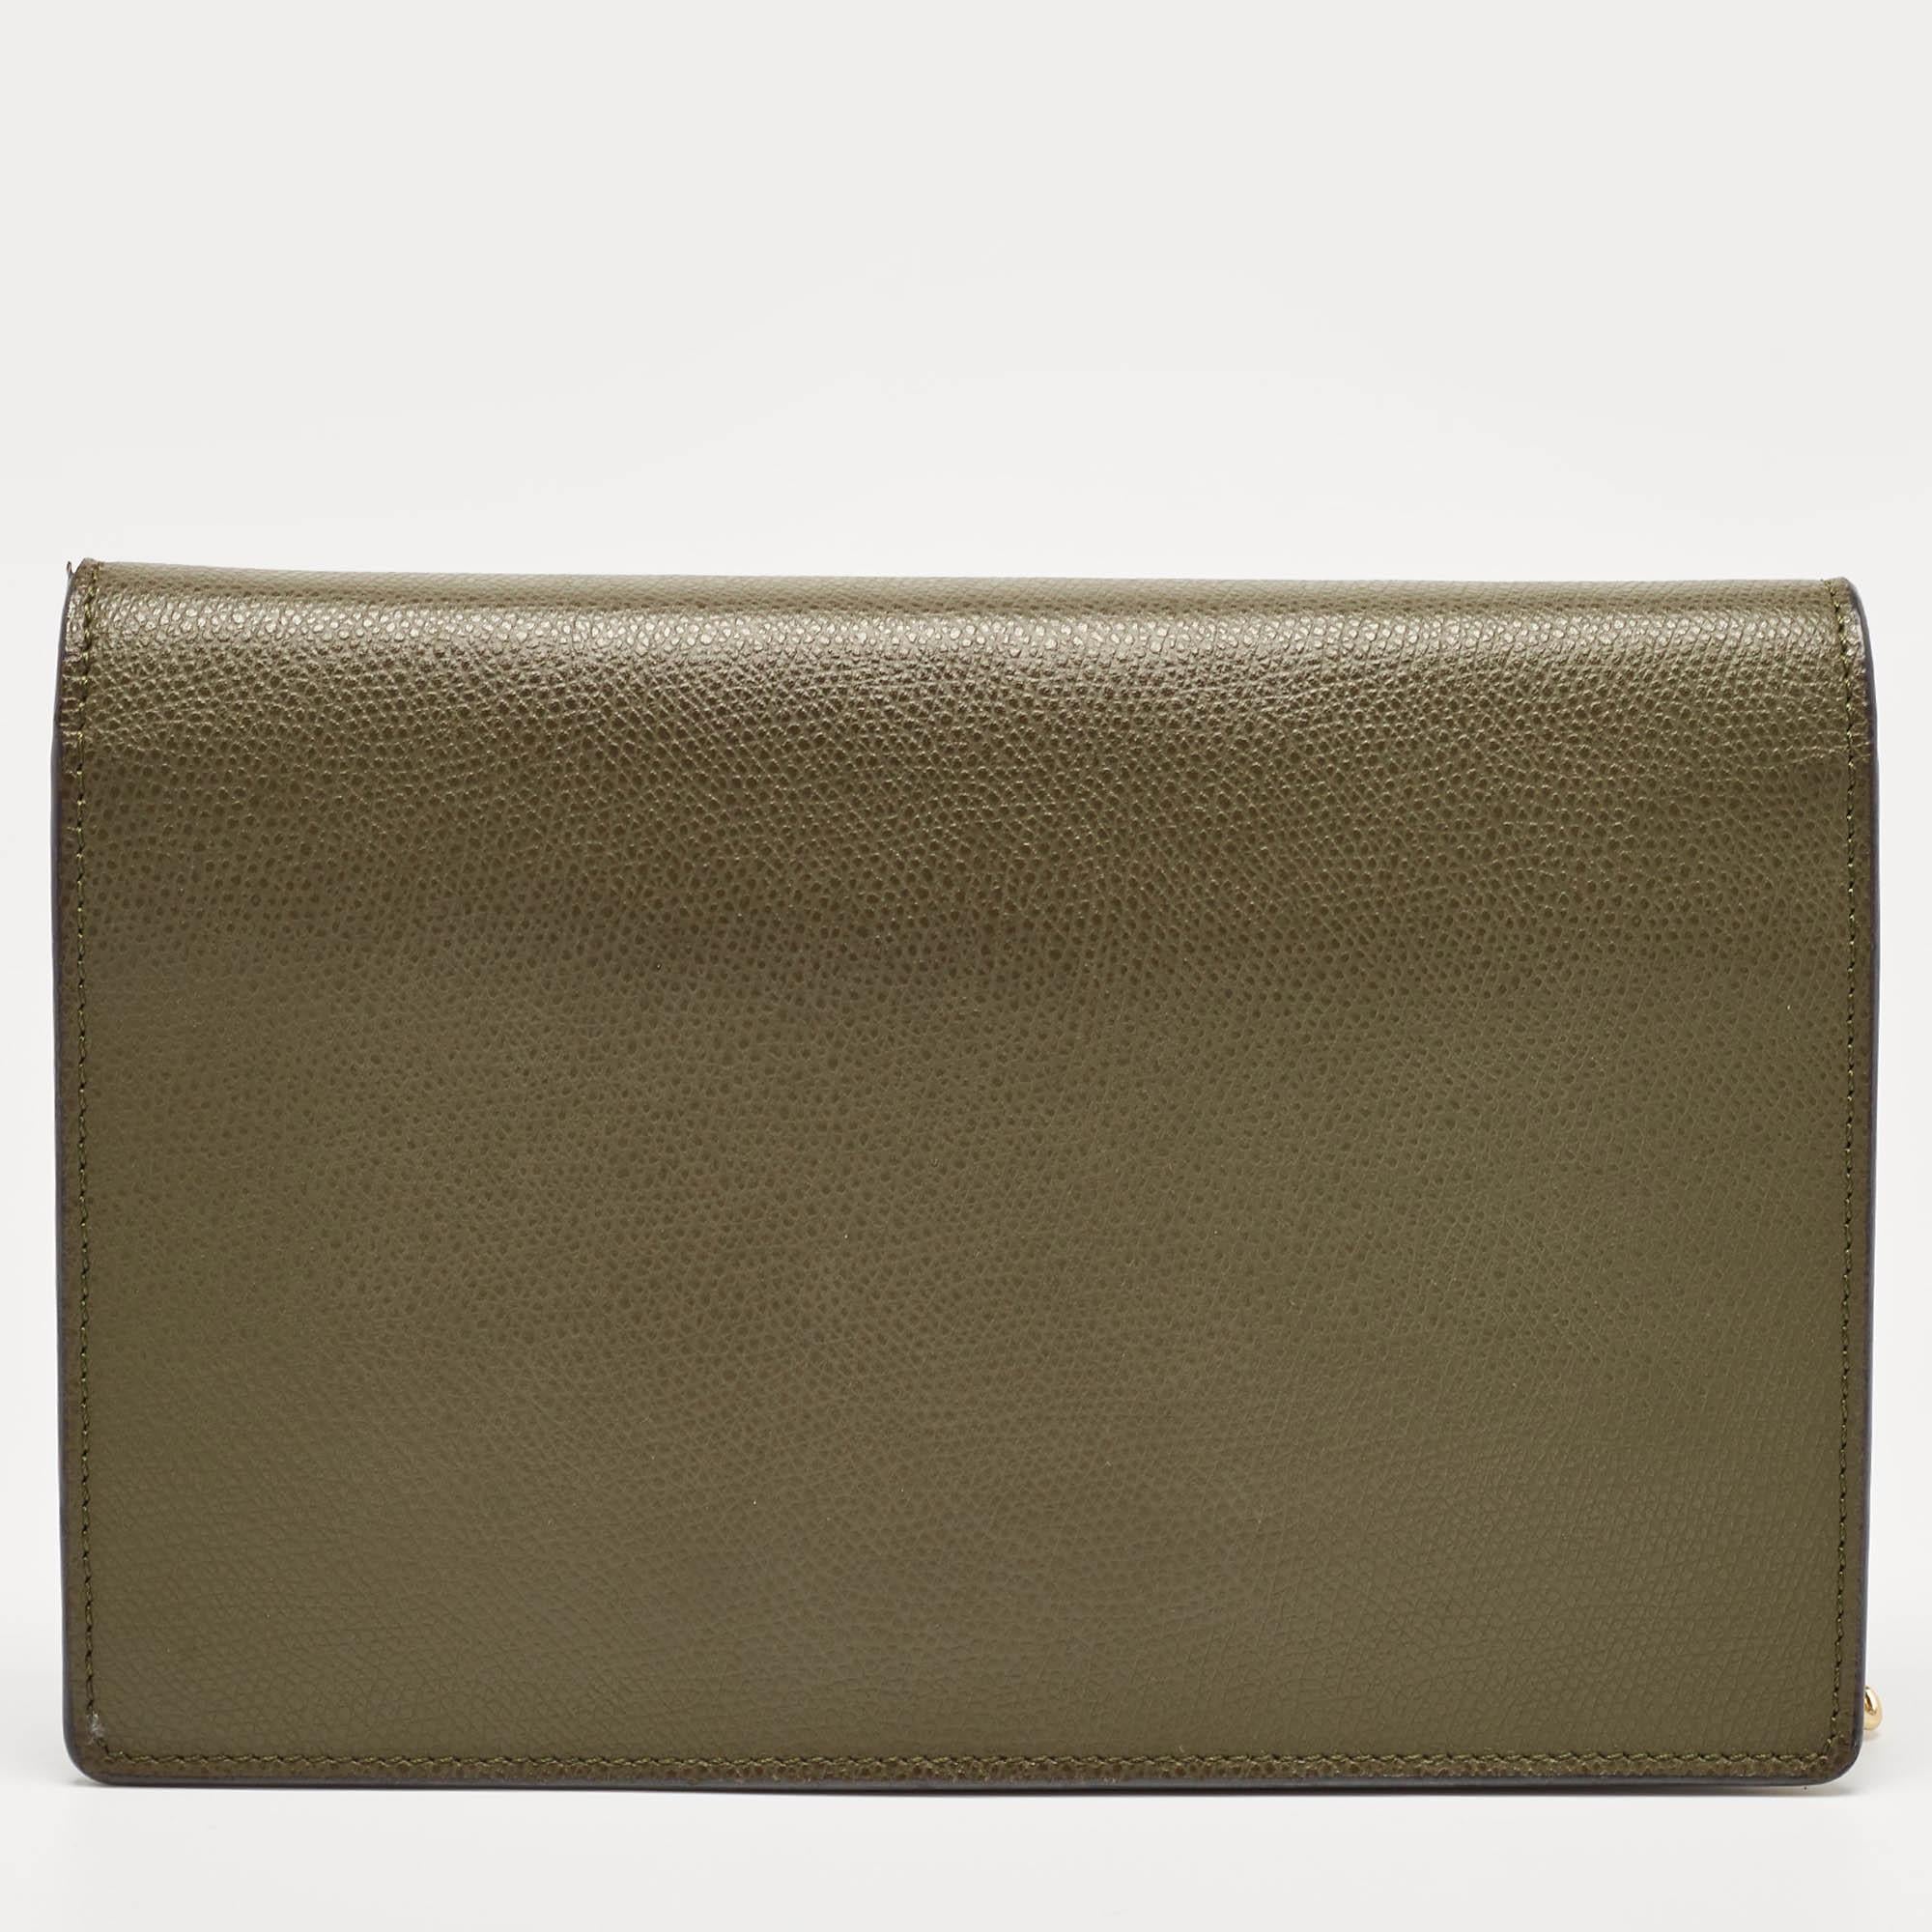 This Fendi Wallet On Chain has been beautifully crafted using olive green leather. The flap carries the F logo in gold-tone metal, and it secures a lined interior sized to dutifully hold your essentials. The bag is complete with a shoulder